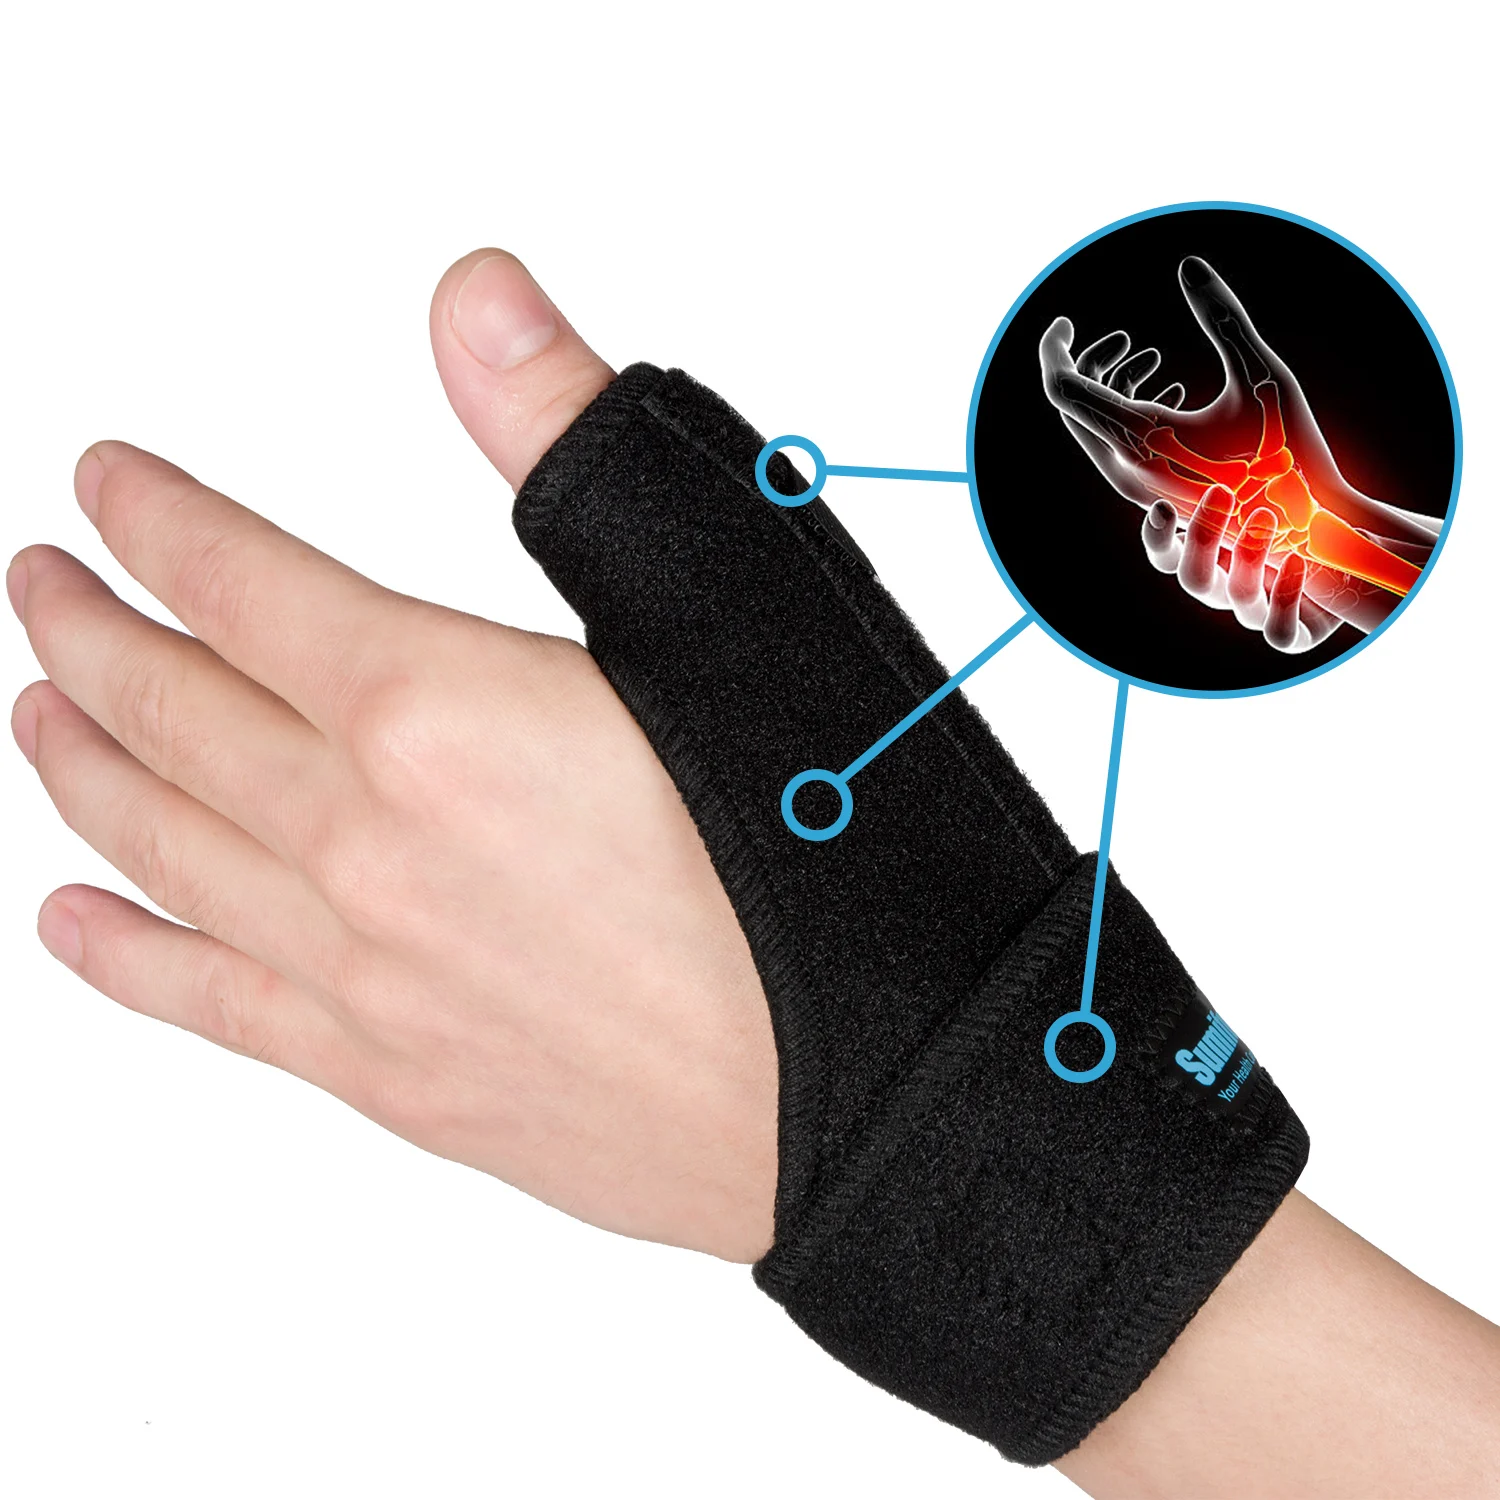 1pcs Hand Protecor Thumb Spica Wrist Brace Splint Support for Arthritis Tendonitis Carpal Tunnel Pain Relief C1572 1pcs elastic carpal tunnel wristbands exercise wrist protector brace support hand left right bowling drawing mouse keyboard gym